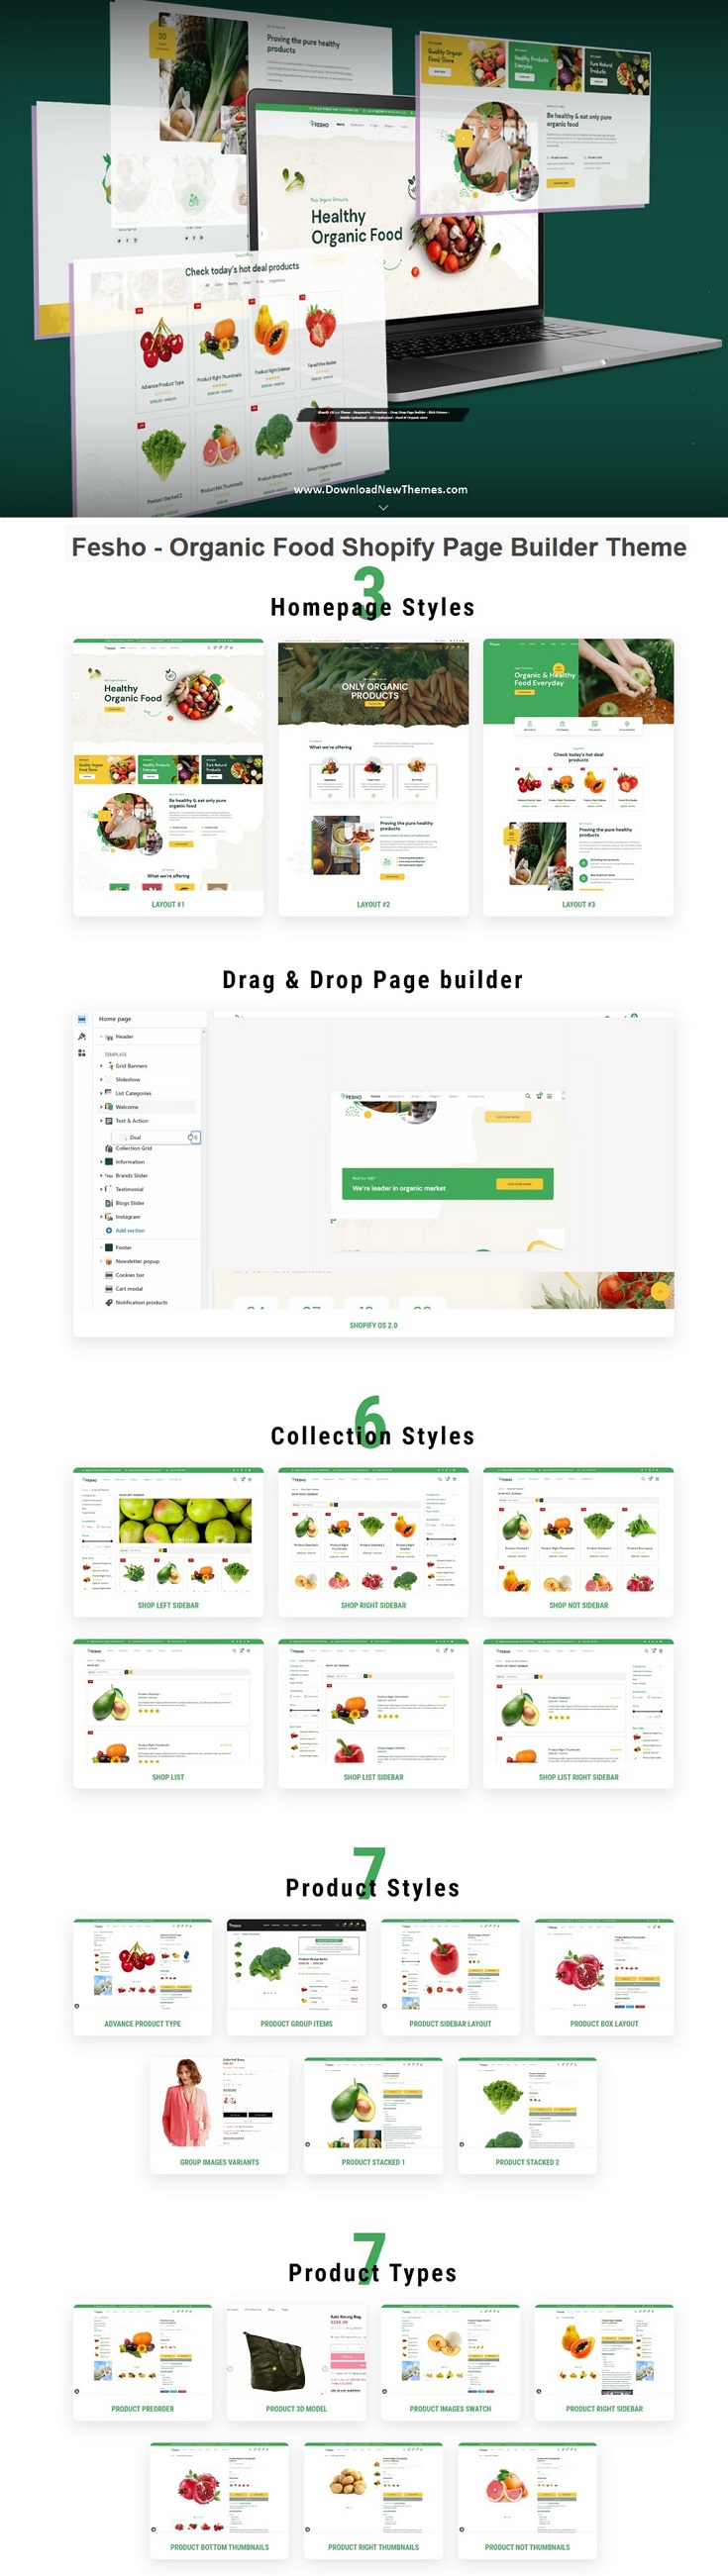 Fesho - Organic Food Shopify Page Builder Theme Review